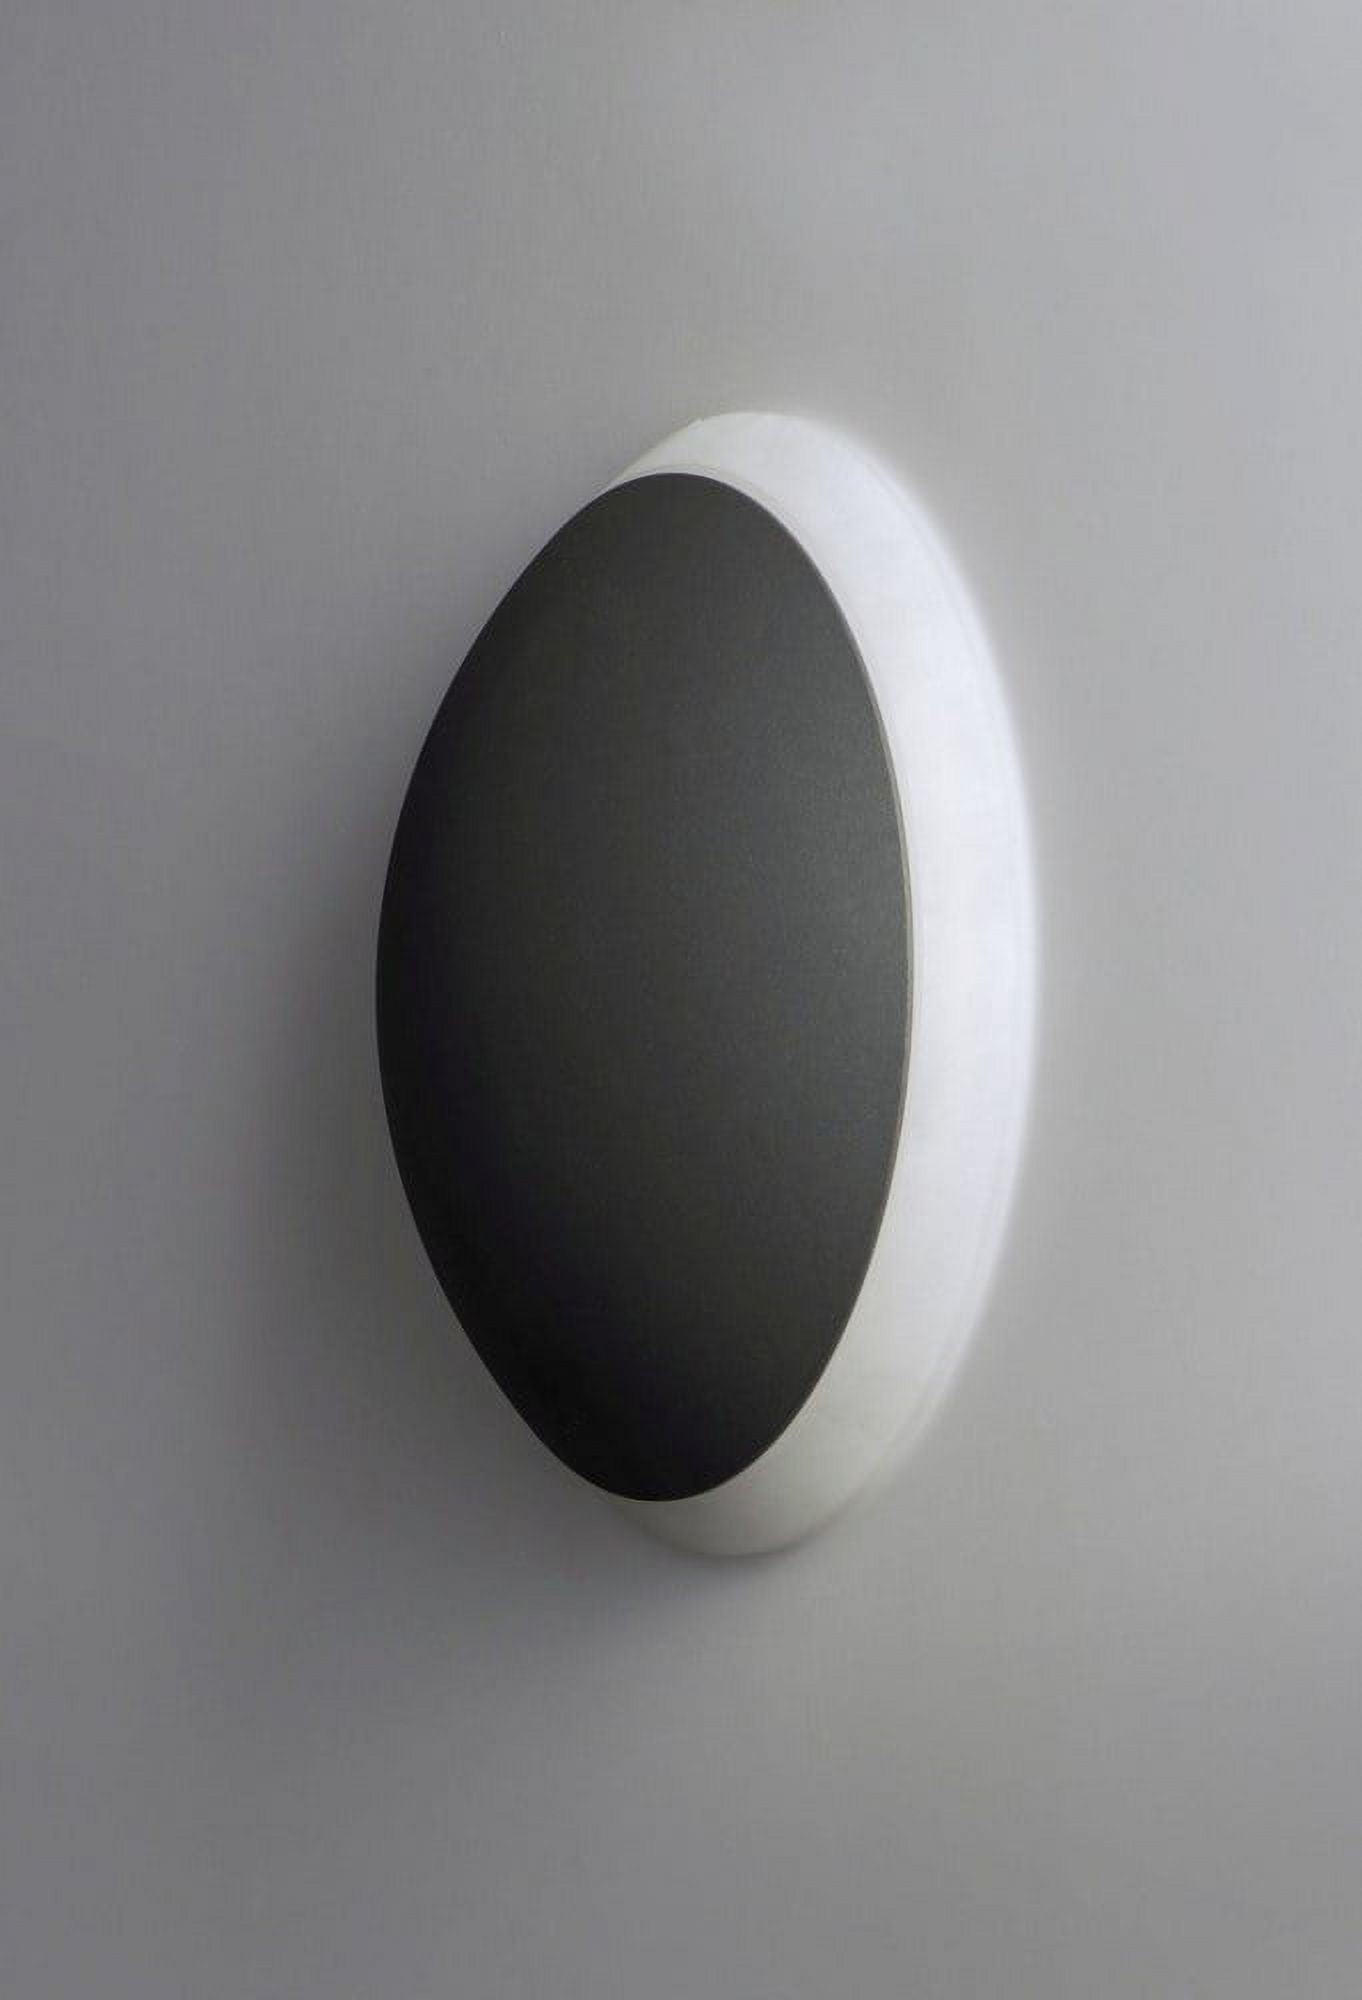 Et2 E41502 Alumilux Sconce 6-1/4" Tall Led Wall Light - Silver - image 2 of 4